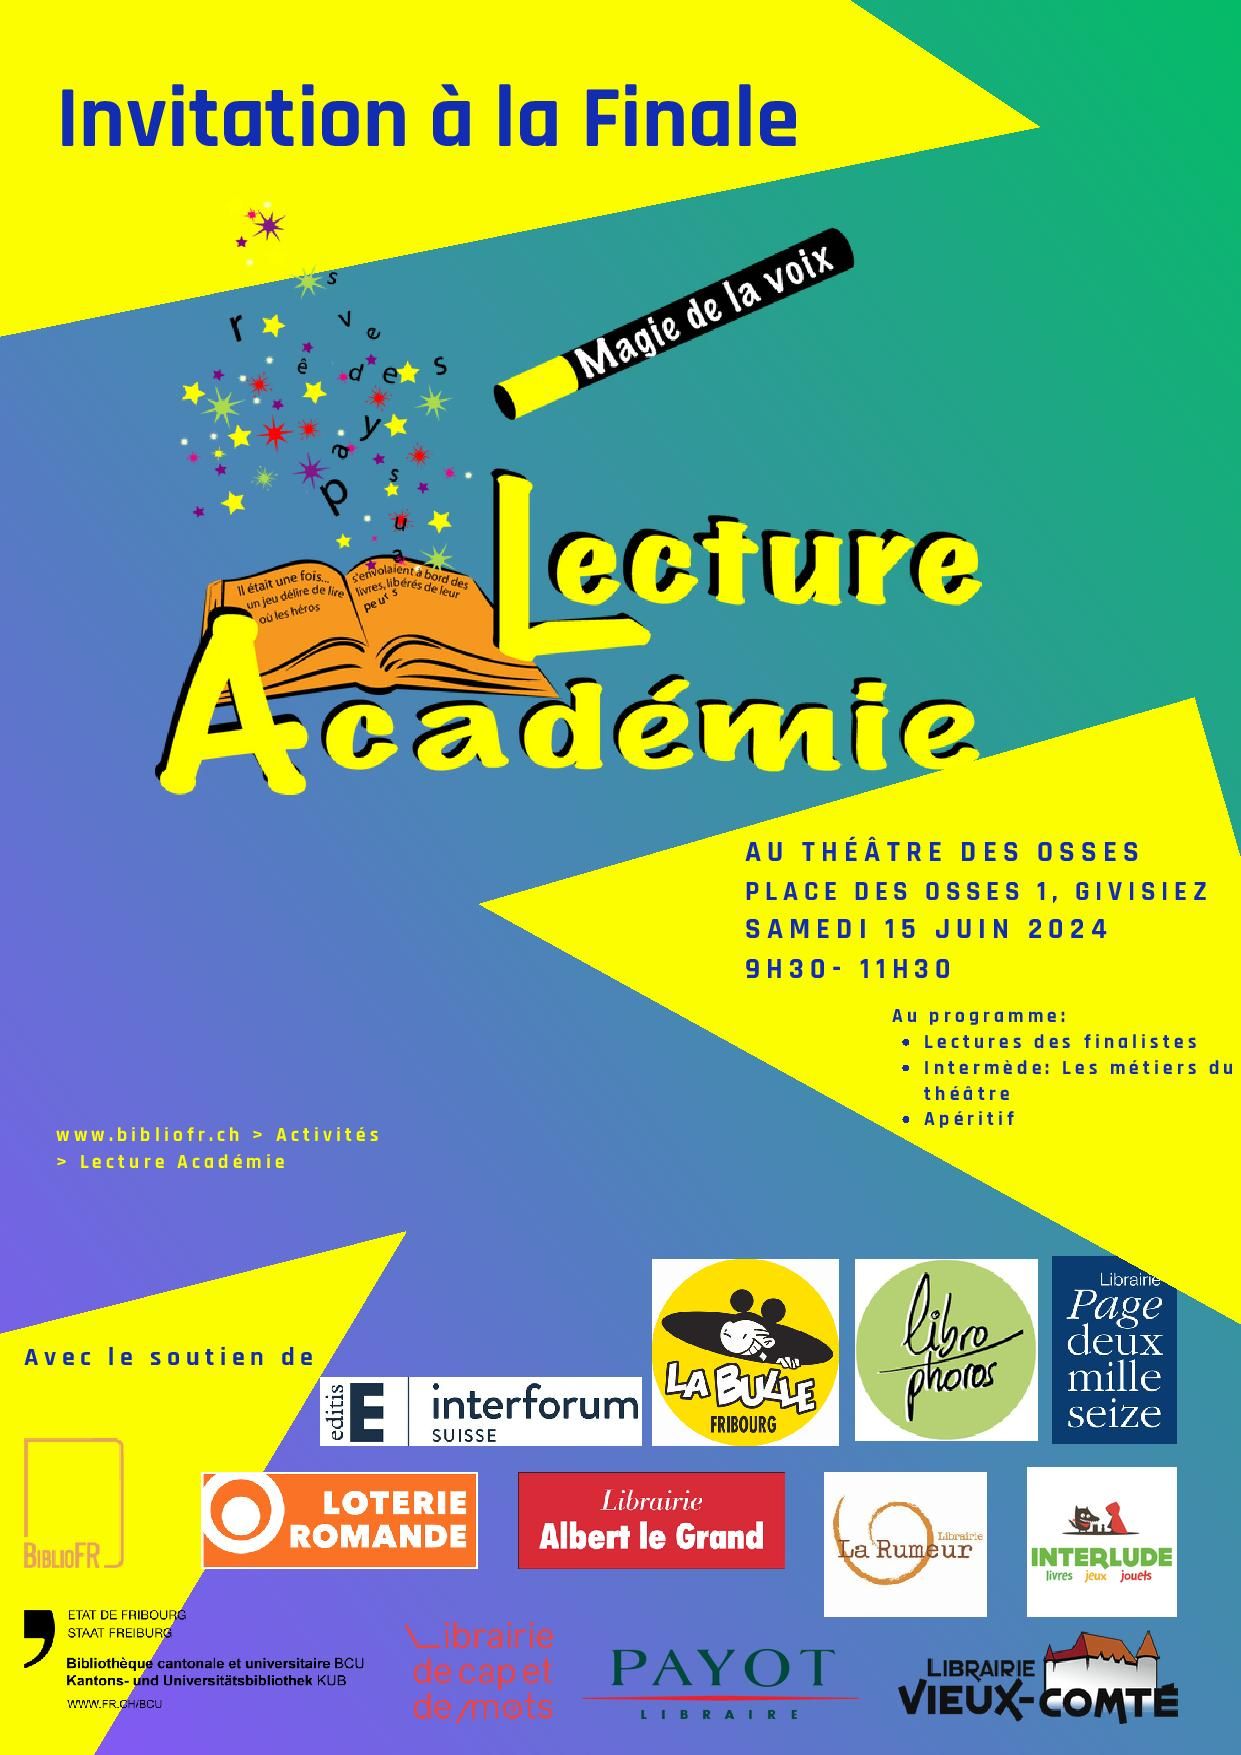 Flyer-invitation_Finale_Lecture_Academie_2024-page-001.jpg